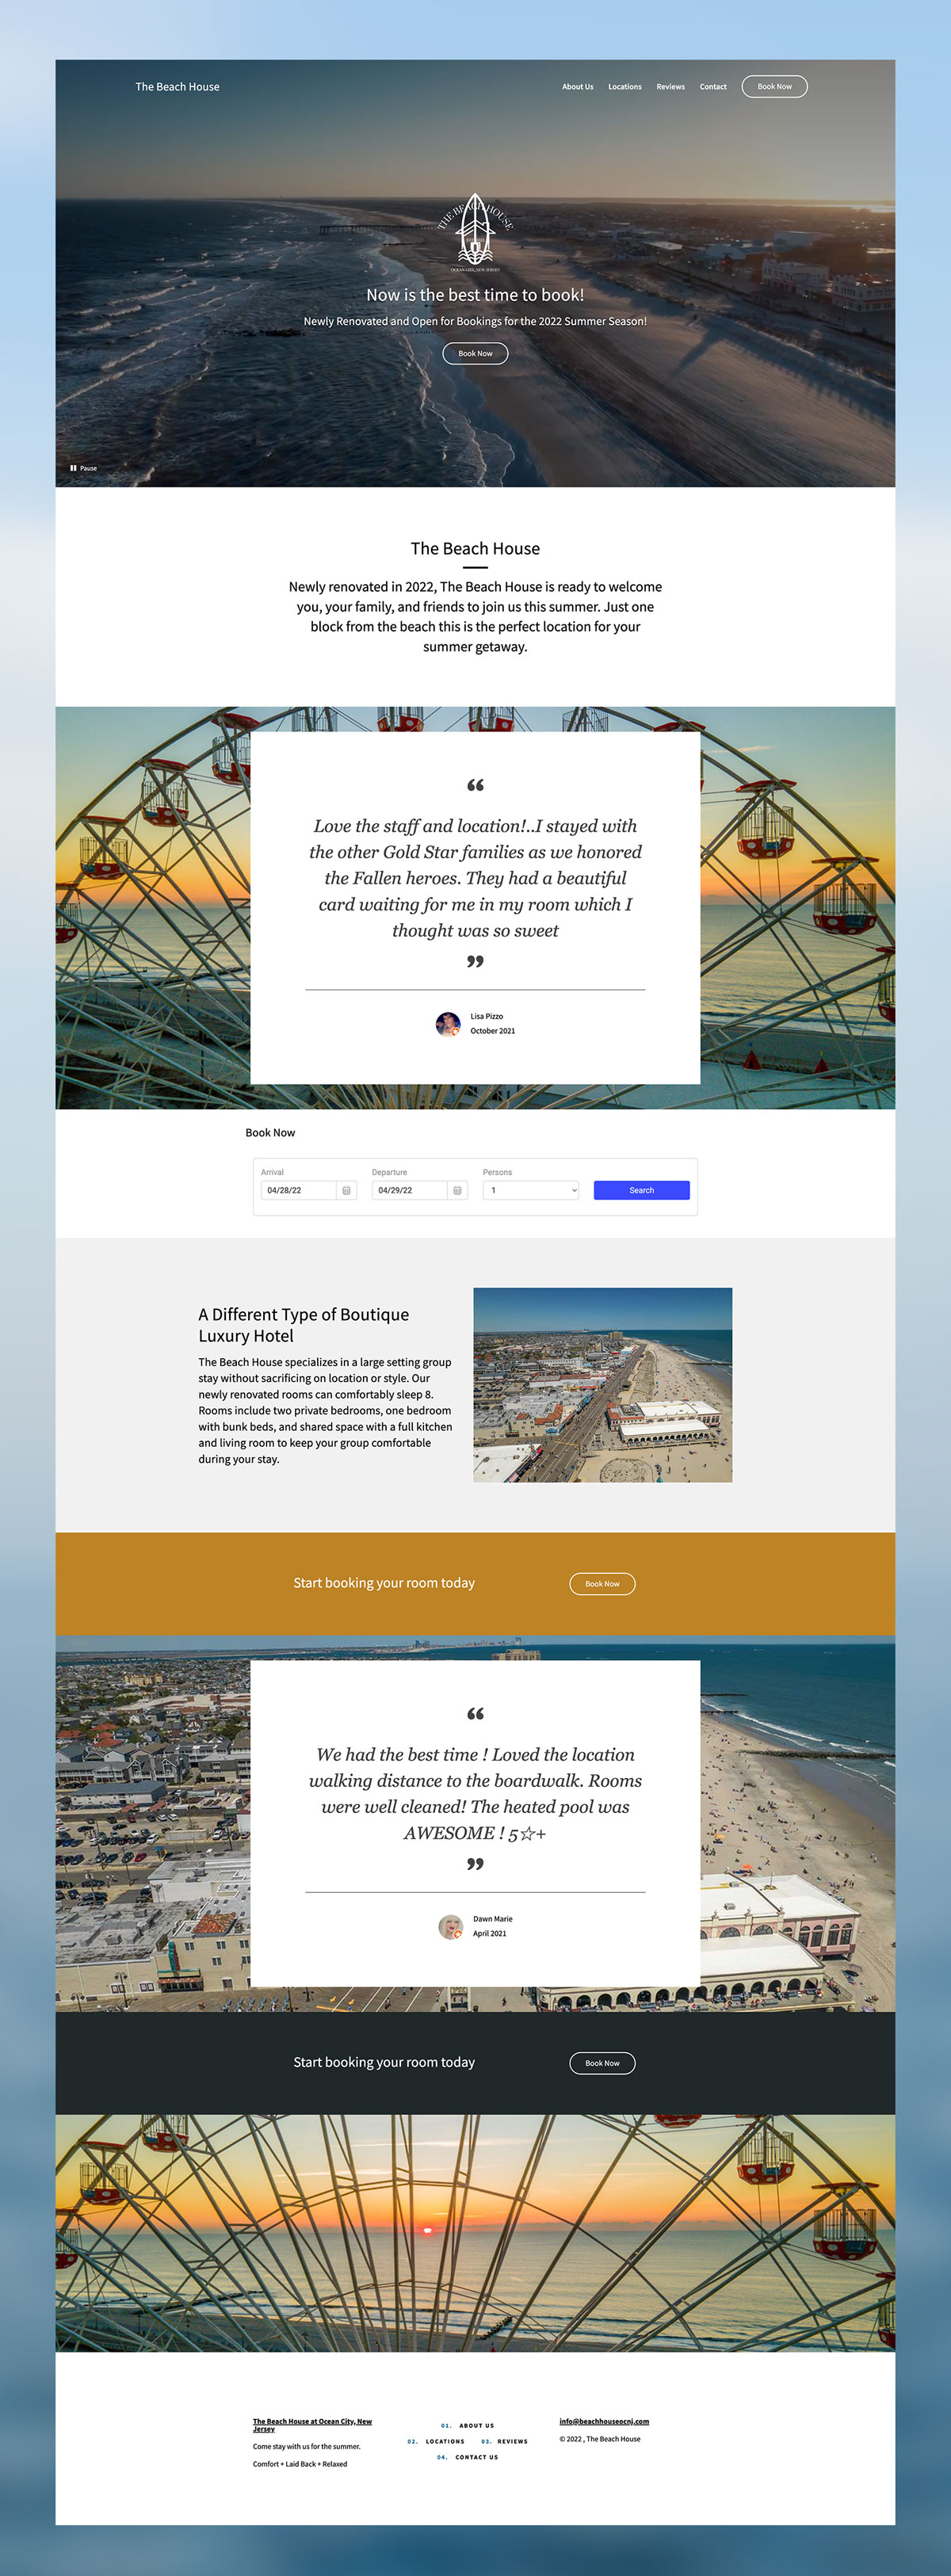 full page layout for beachhouseocnj.com